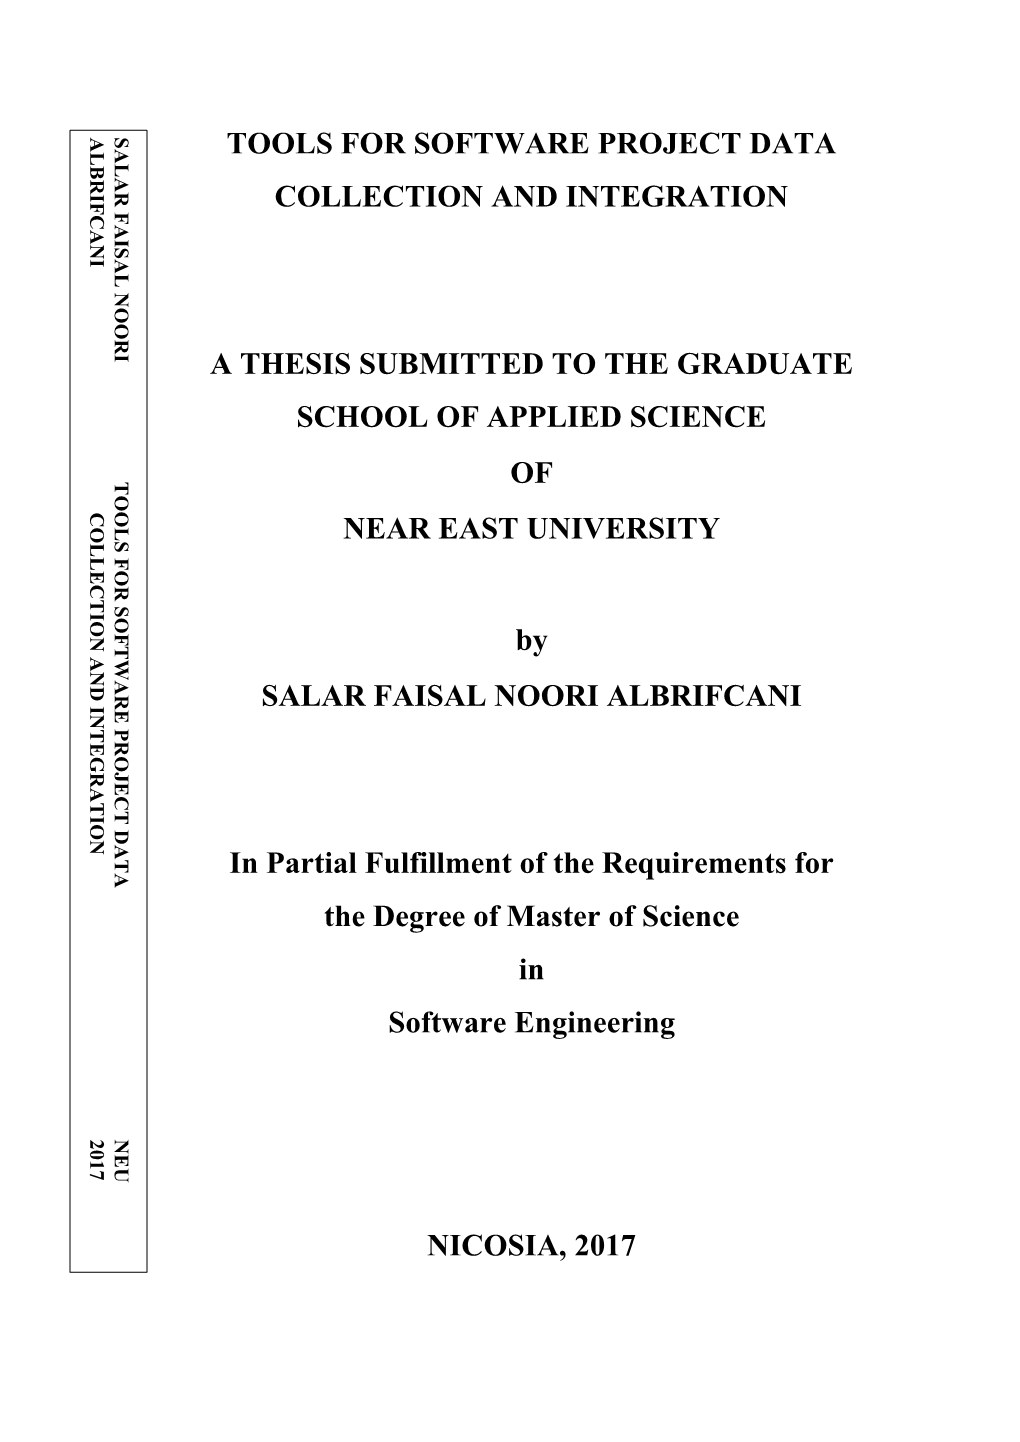 Tools for Software Project Data Collection and Integration a Thesis Submitted to the Graduate School of Applied Science Of